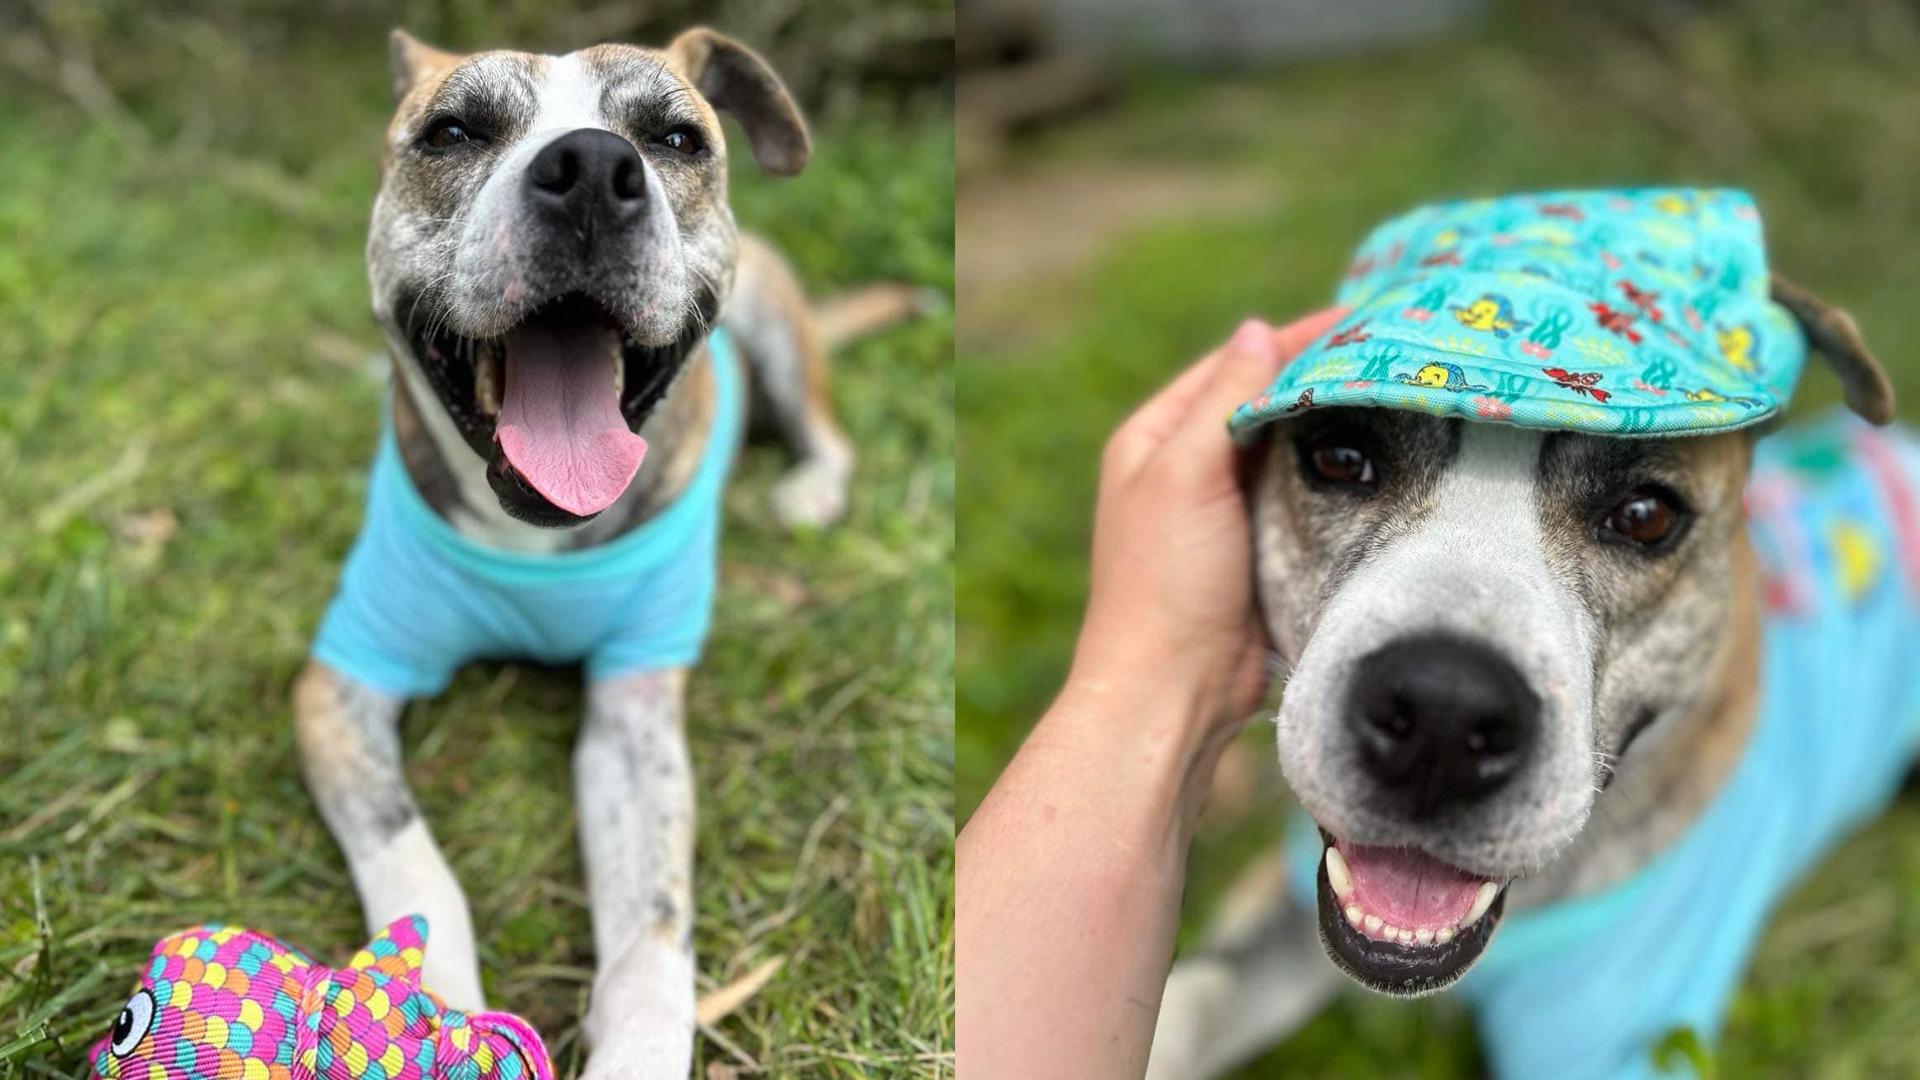 Volunteers working hard to find at-risk dog his forever home | whas11.com